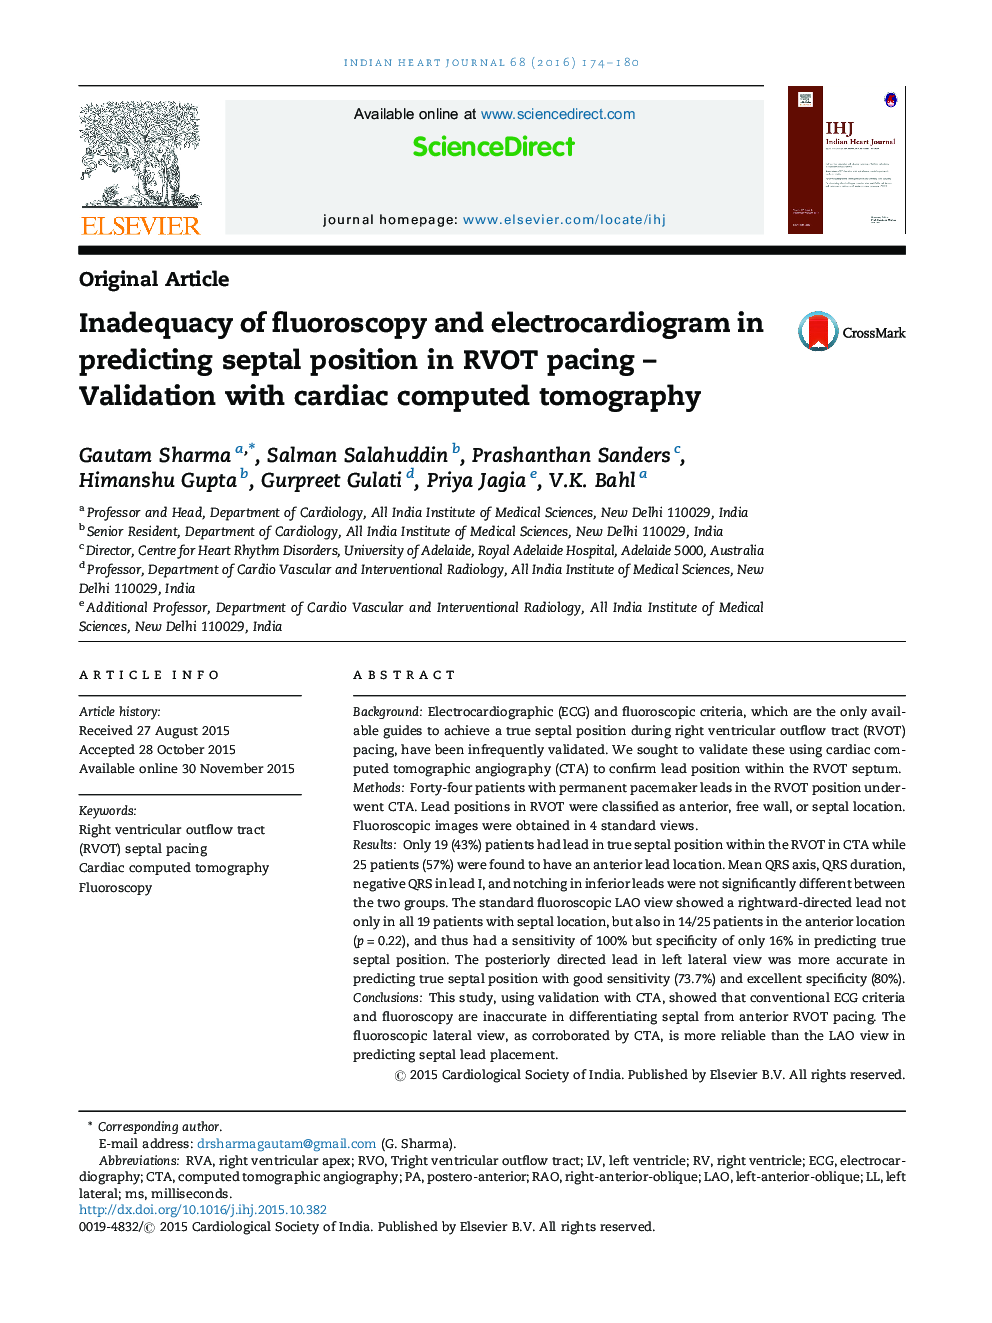 Inadequacy of fluoroscopy and electrocardiogram in predicting septal position in RVOT pacing – Validation with cardiac computed tomography